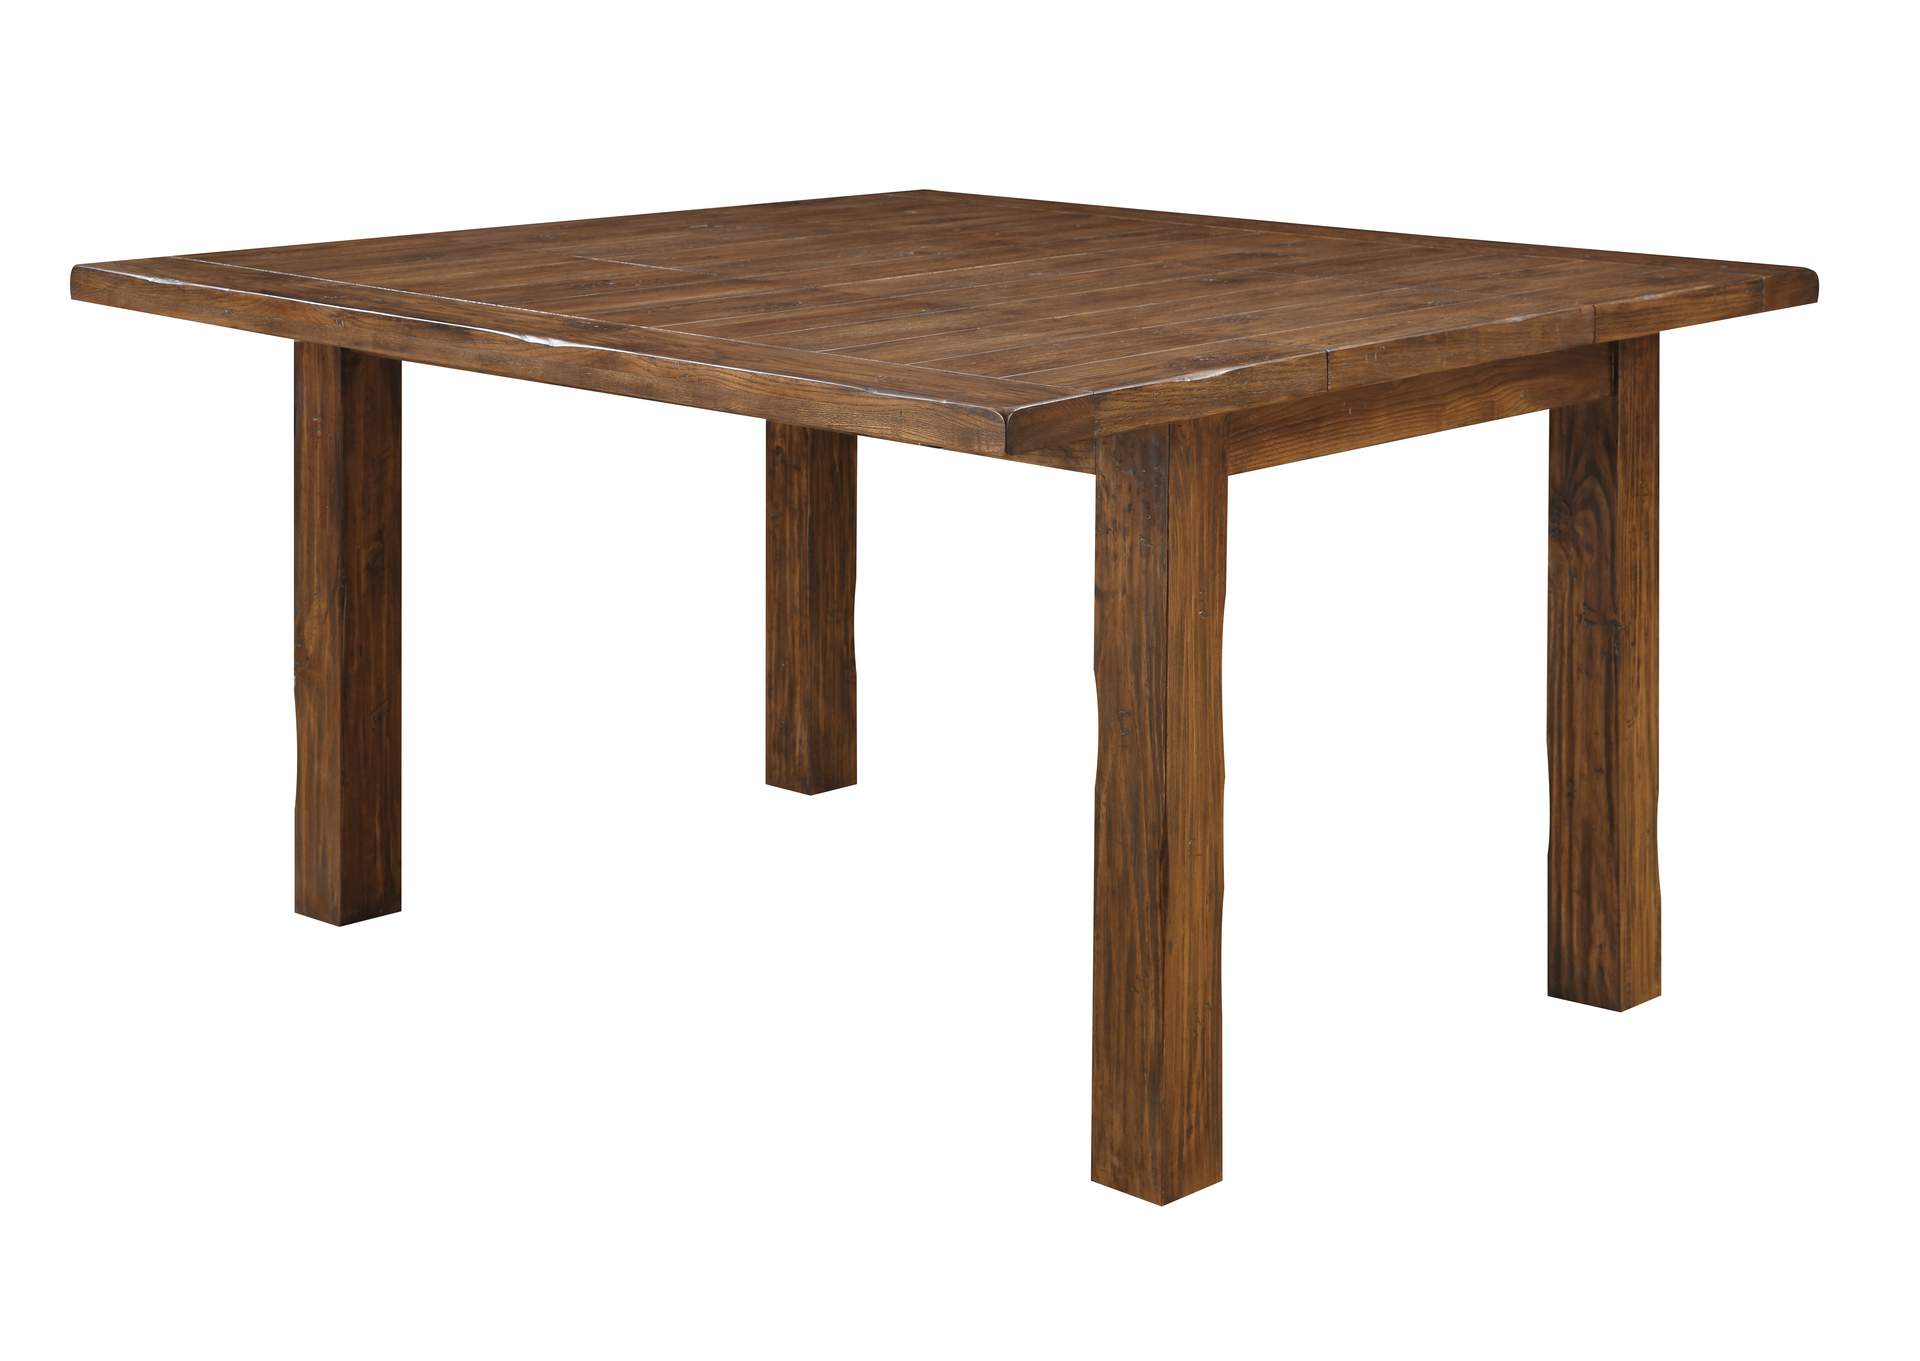 Chambers Creek Gathering Height Butterfly Leaf Dining Table,Emerald Home Furnishings